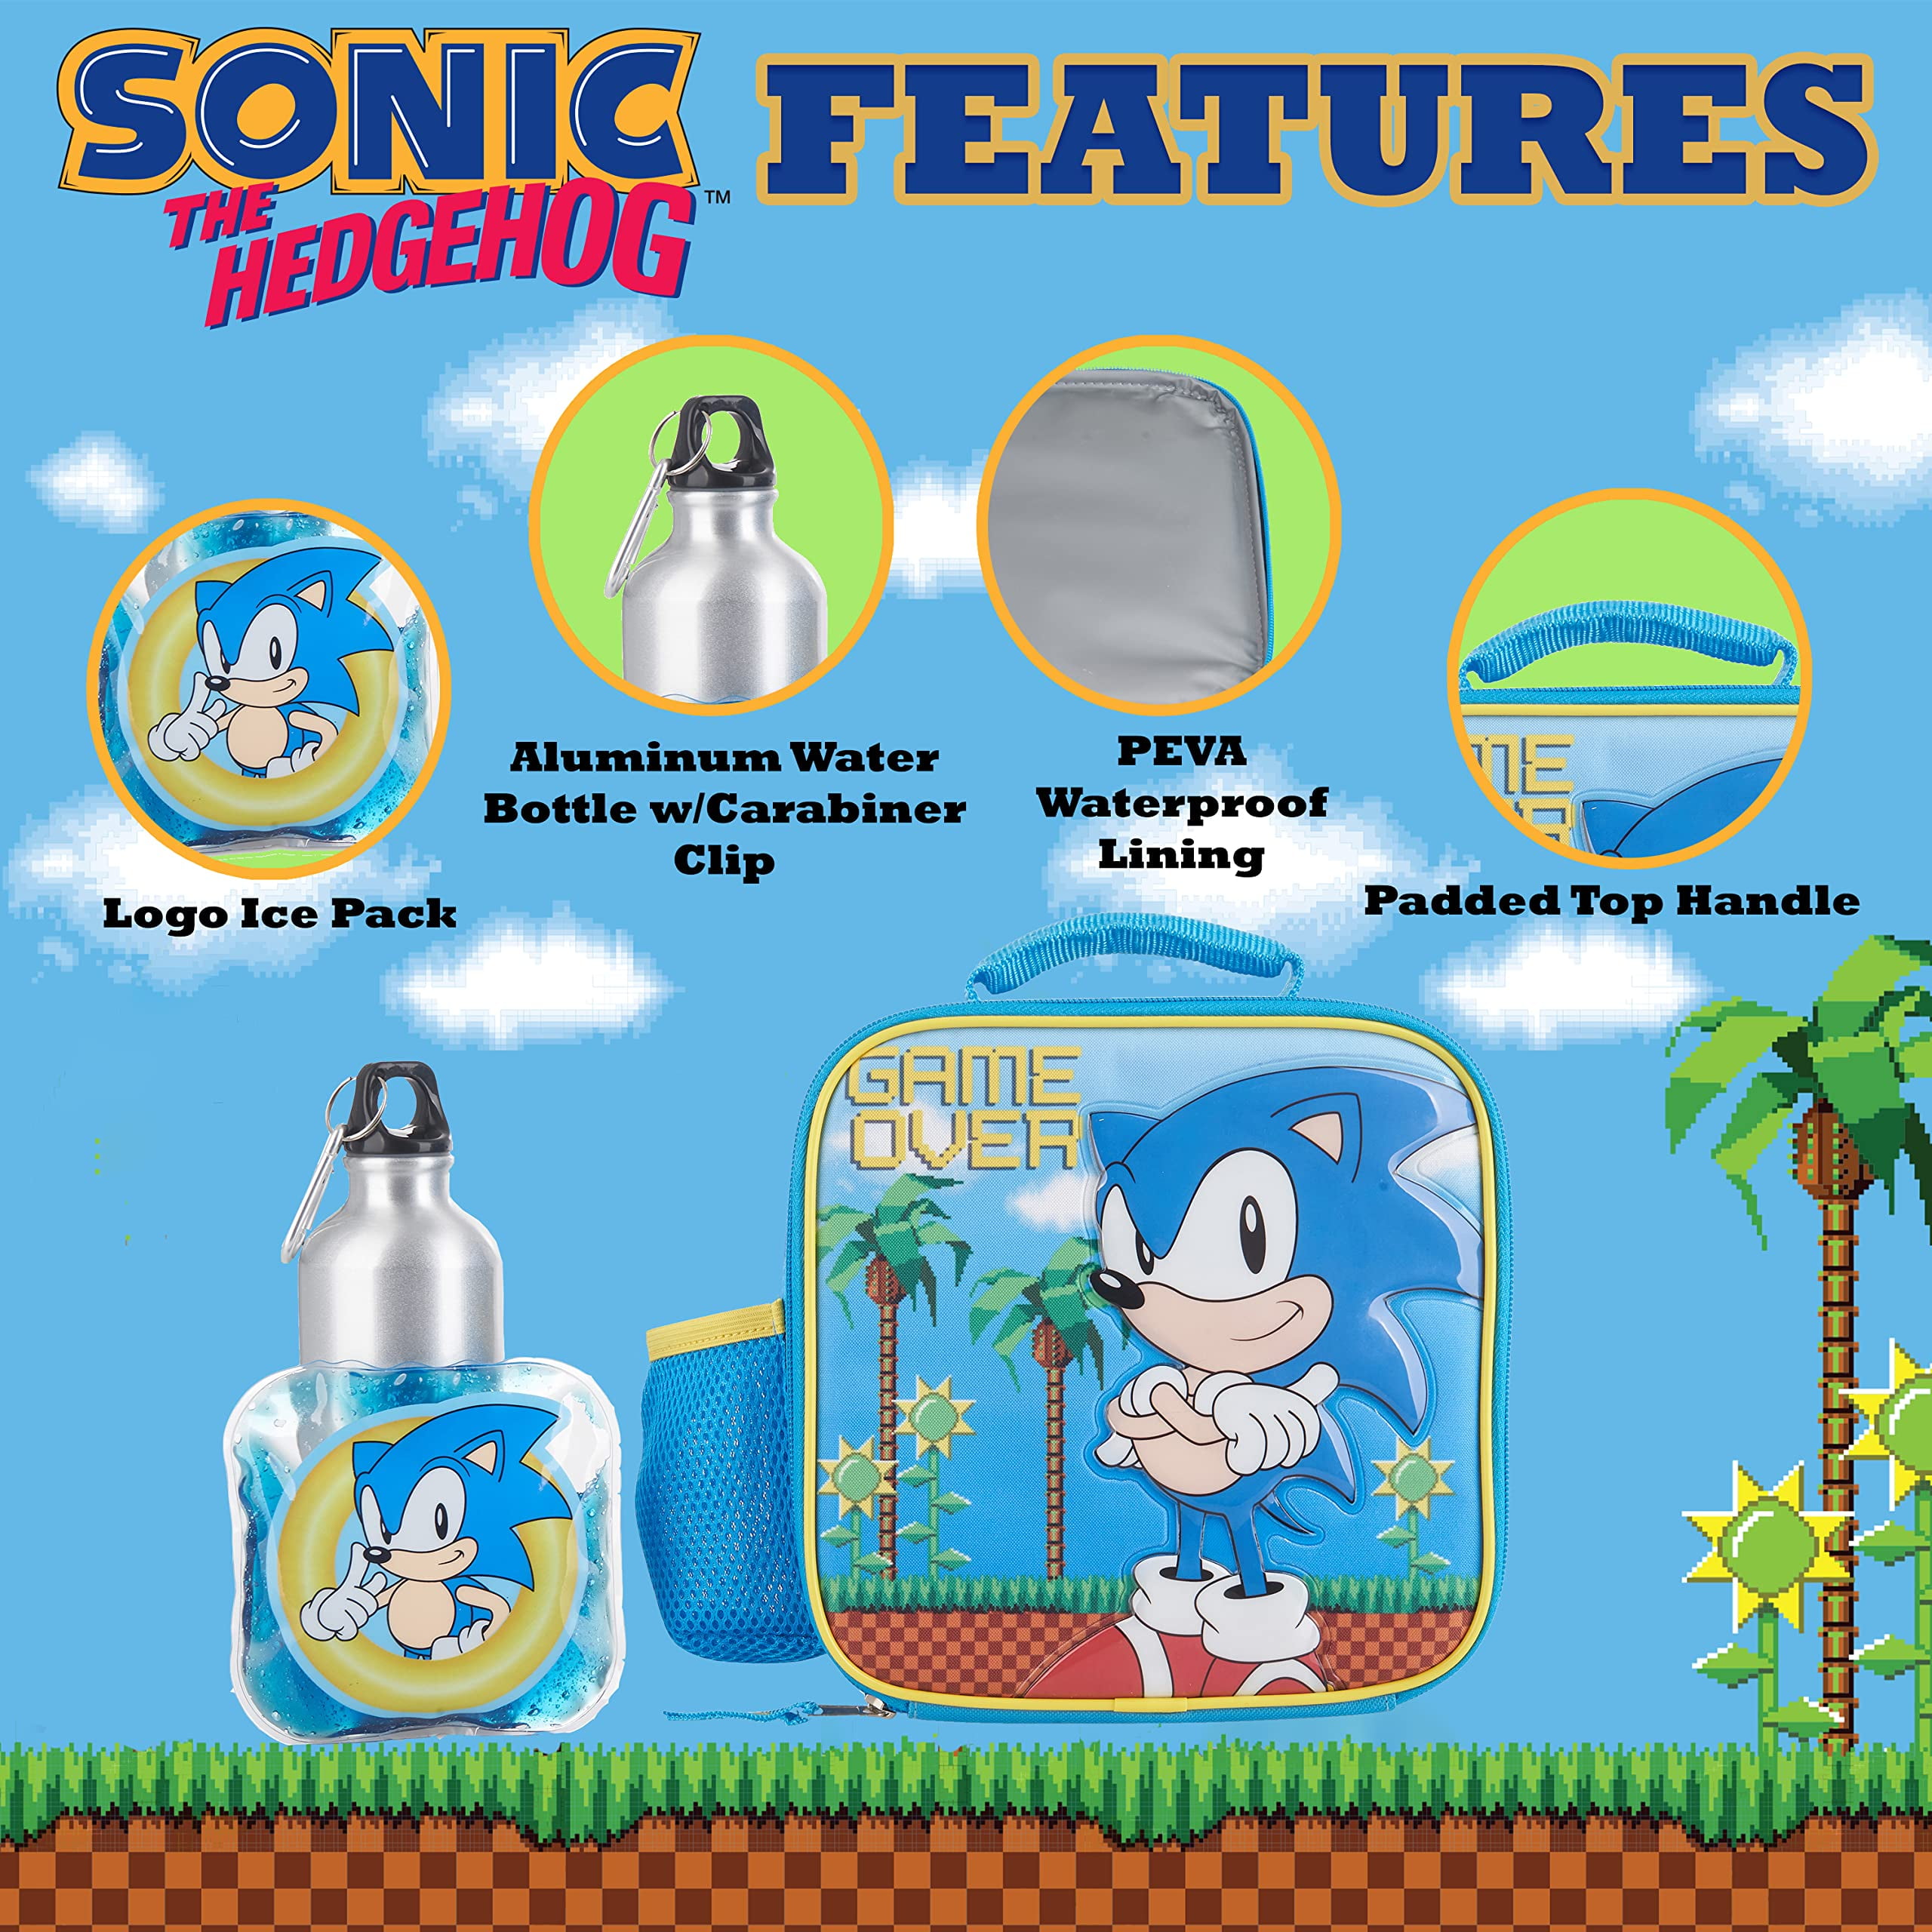 Sonic The Hedgehog Lunch Box Kids Insulated Lunch Bag for Boys (Blue/Y